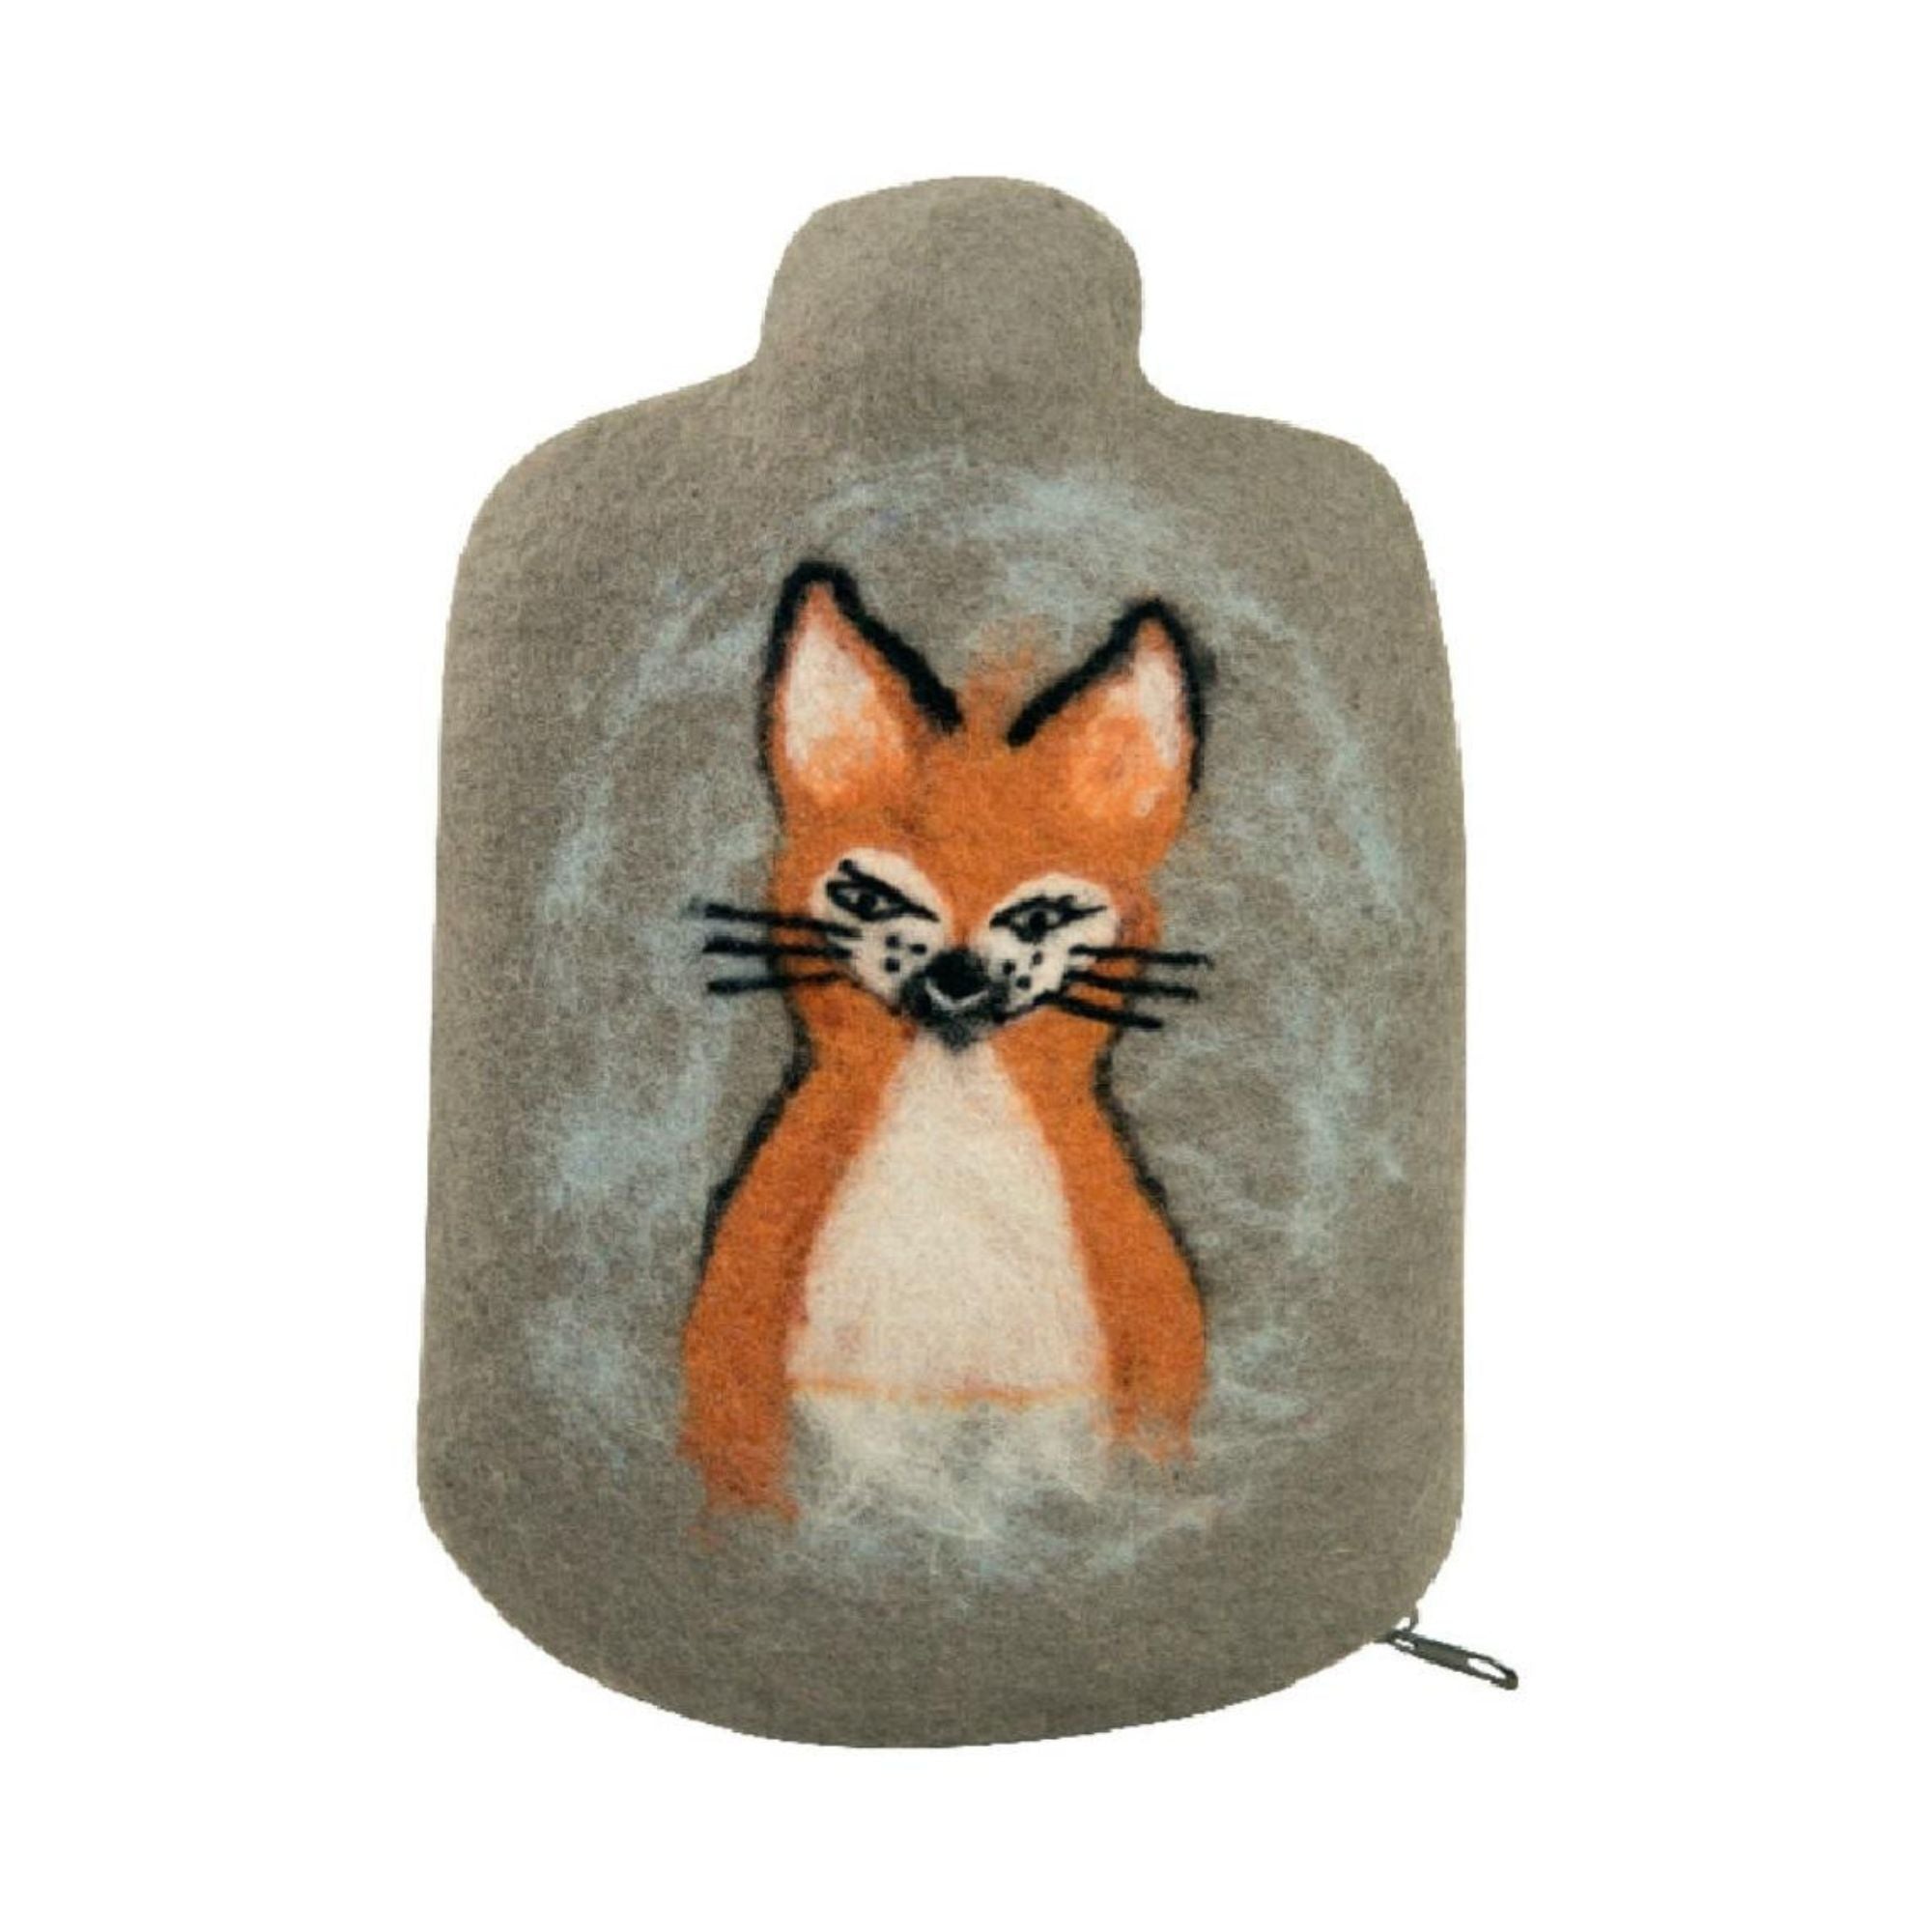 0.8 Litre Eco Hot Water Bottle with Felt Merino Wool Fox Cover (rubberless)